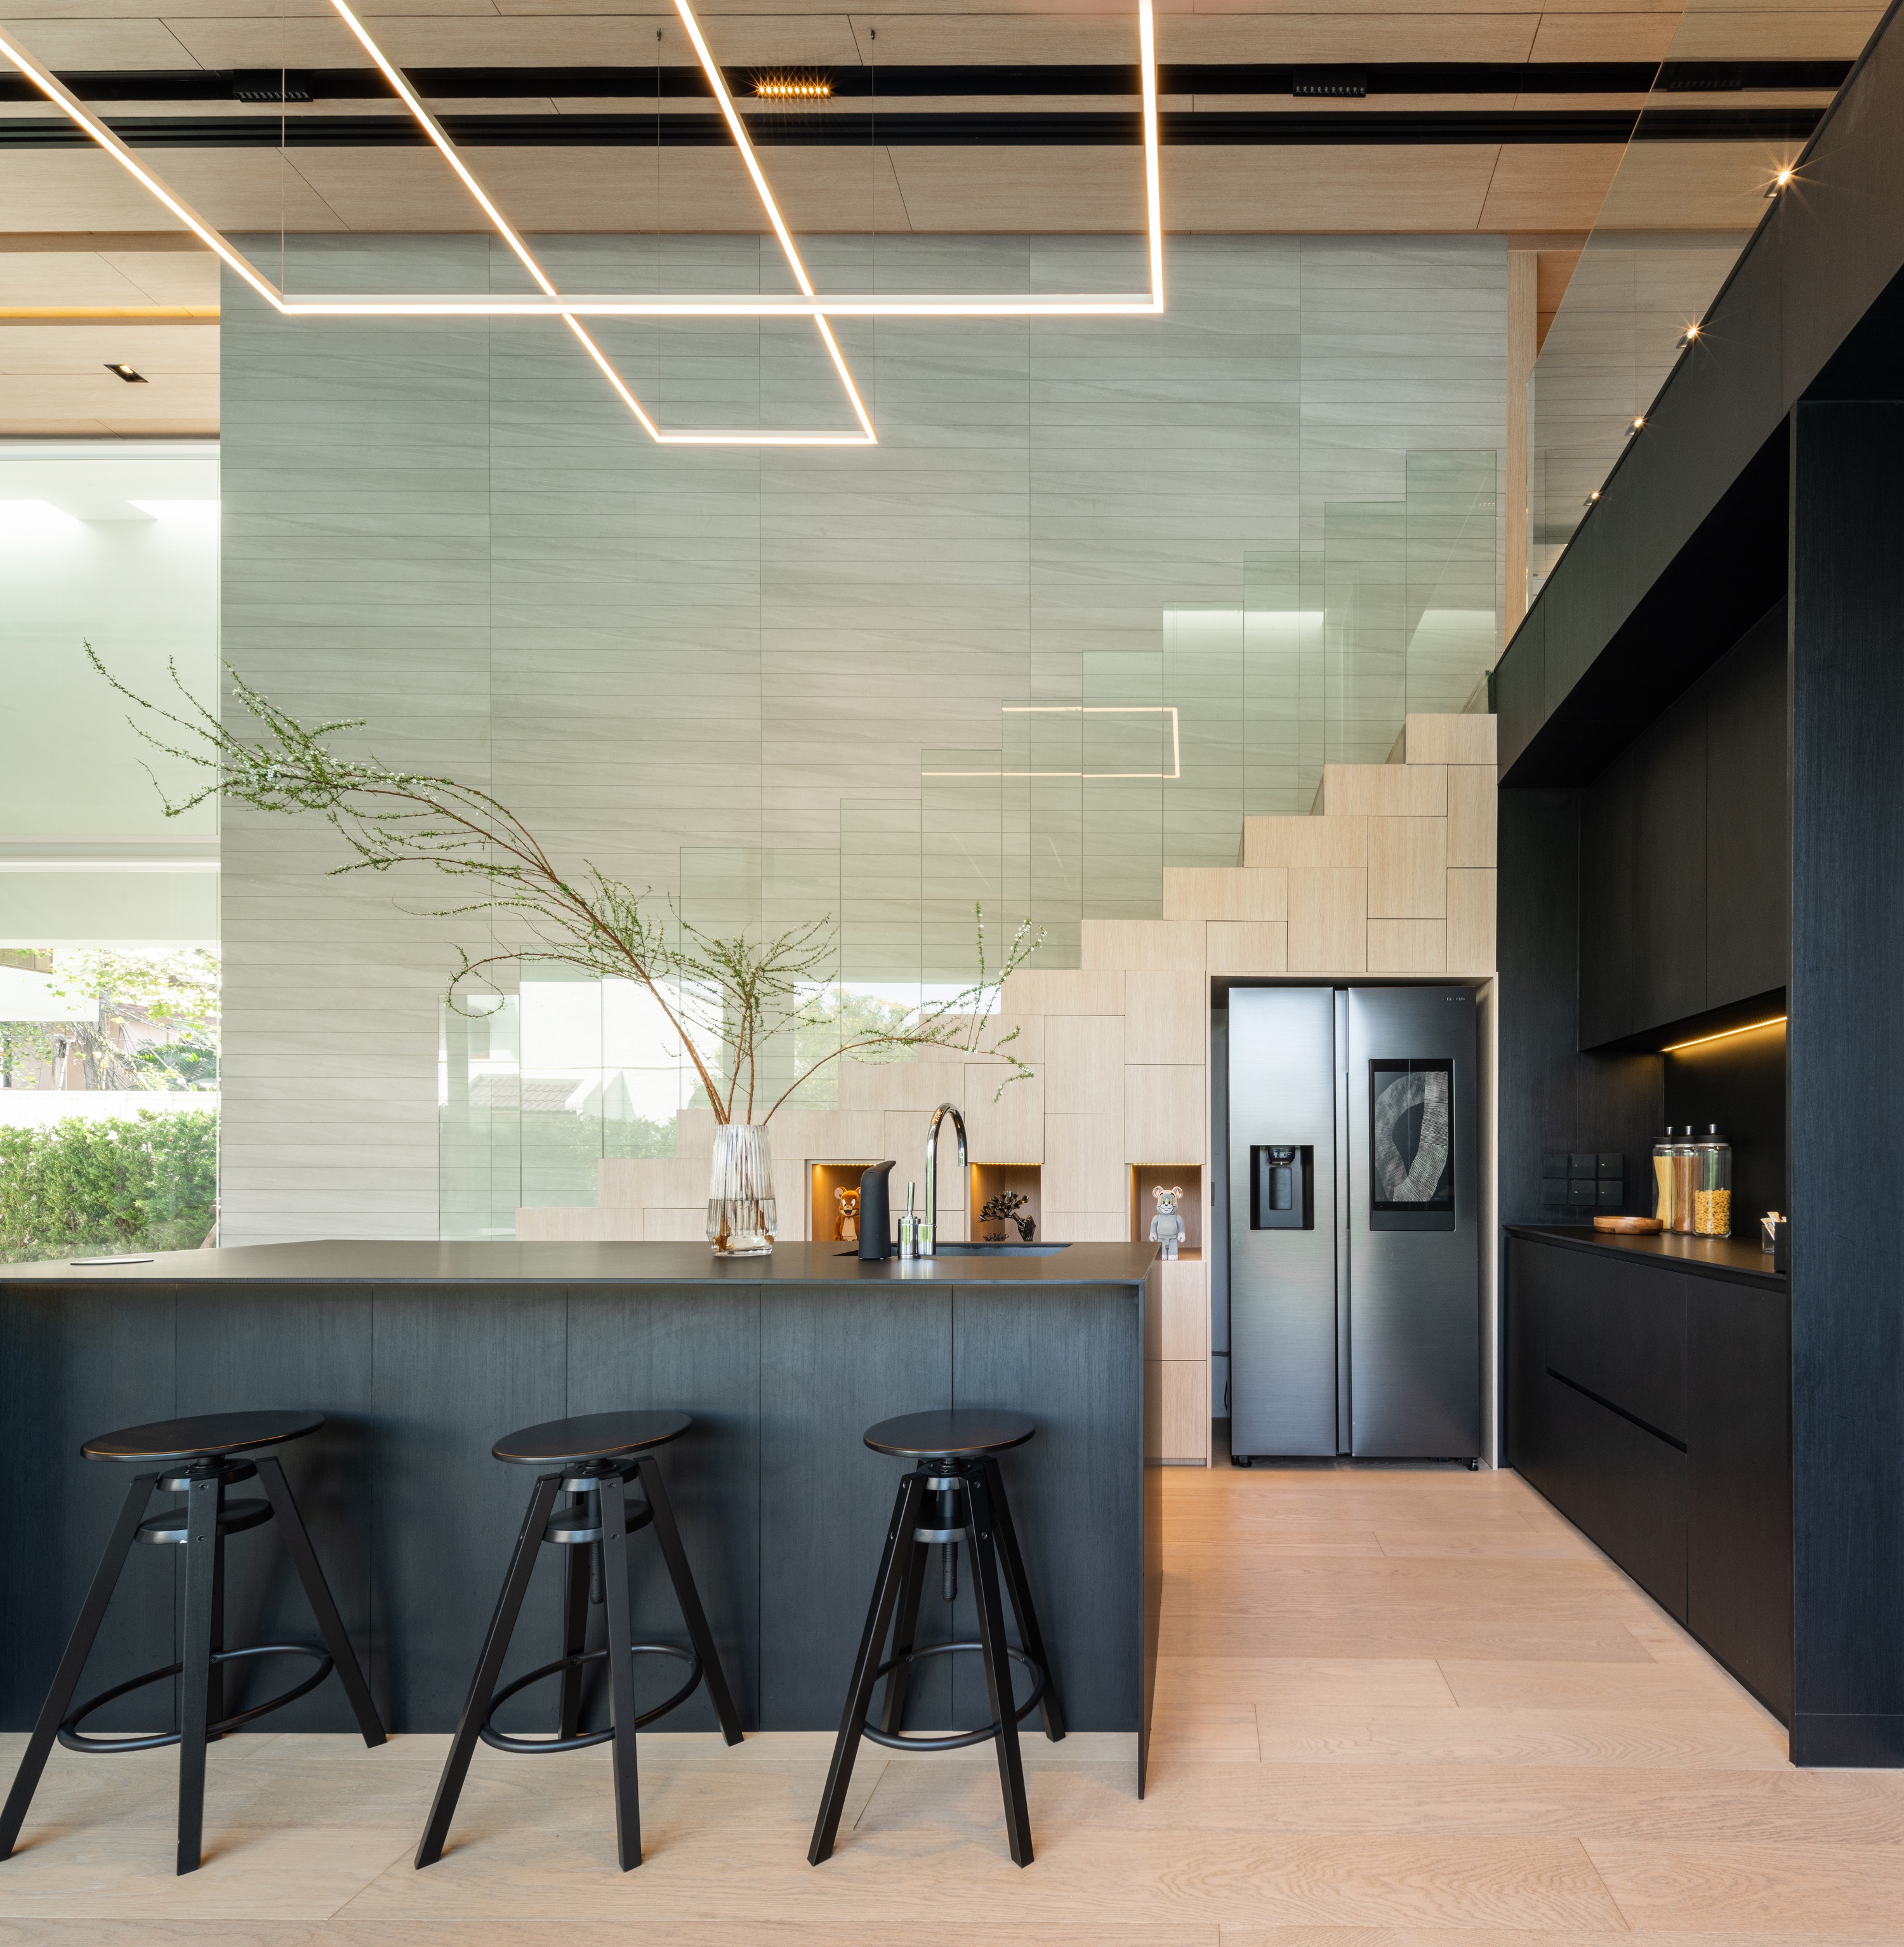 Kitchen interior of TJ House, Photo by SkyGround architectural film & photography